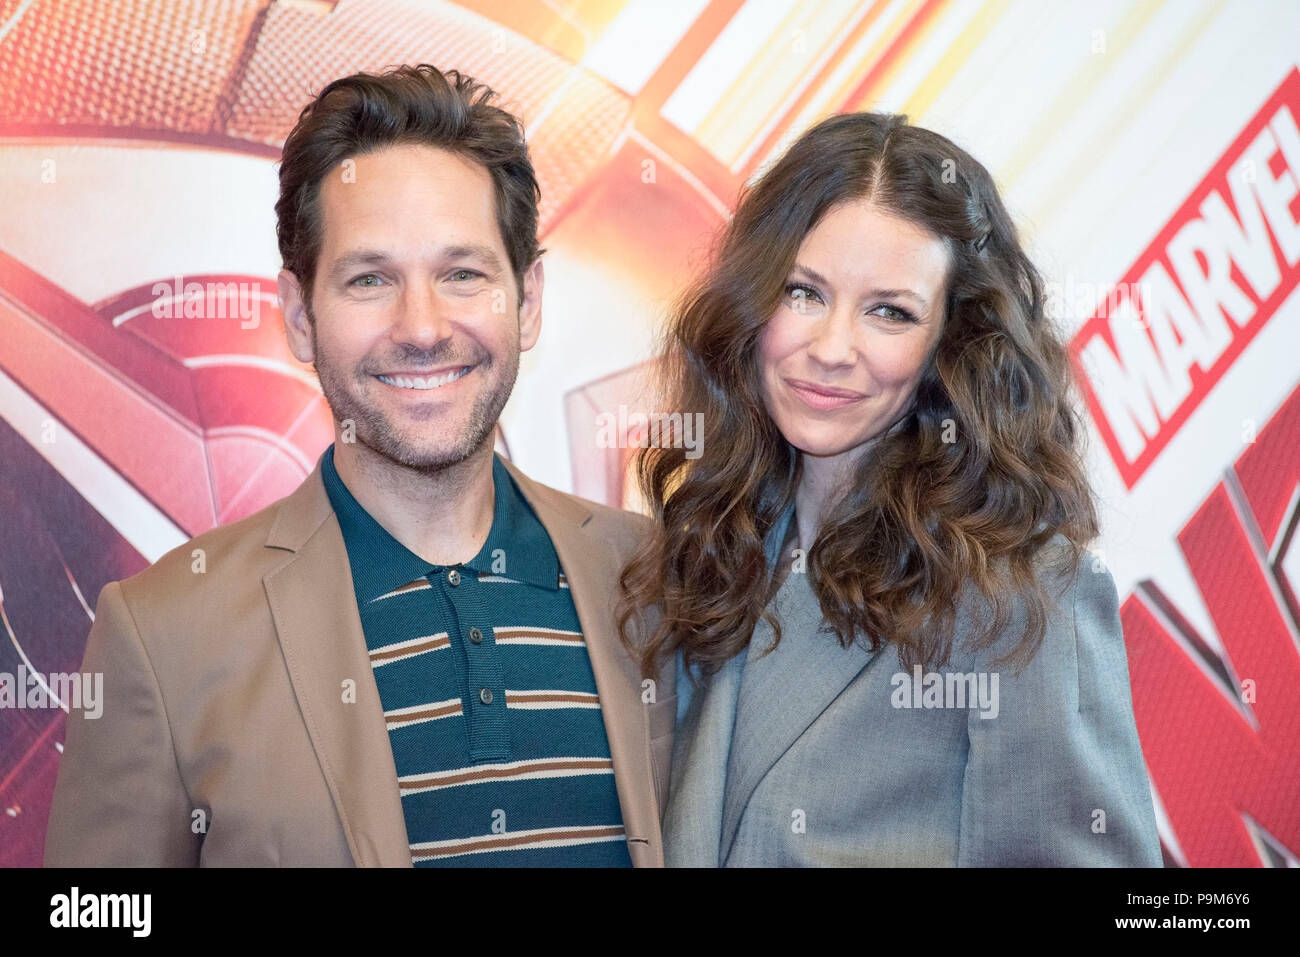 Rome, Italy. 19th July 2018. Paul Rudd and Evangeline Lilly attending the photocall of Ant-Man and the Wasp at Hotel De Russie in Rome Credit: Silvia Gerbino/Alamy Live News Stock Photo